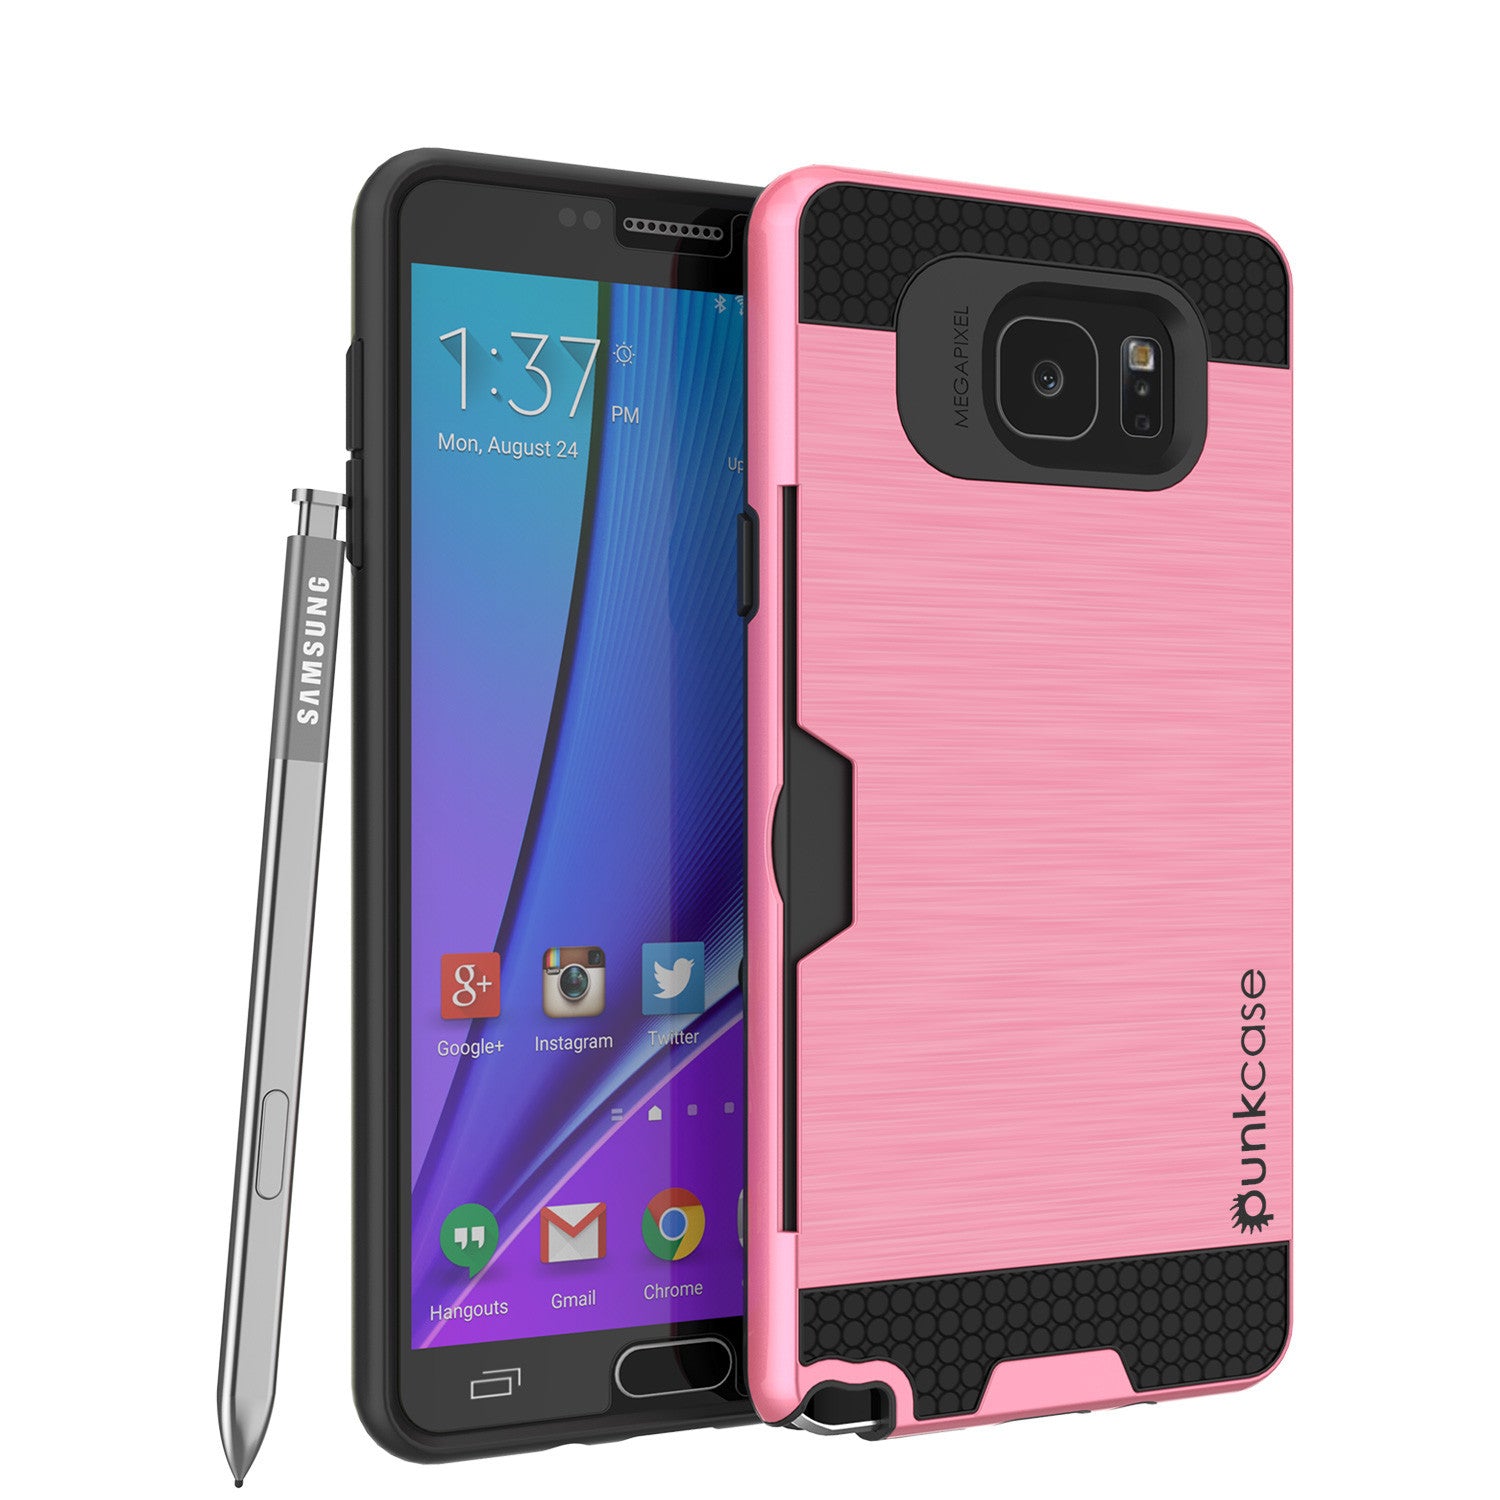 Galaxy Note 5 Case PunkCase SLOT Pink Series Slim Armor Soft Cover Case w/ Tempered Glass (Color in image: Pink)